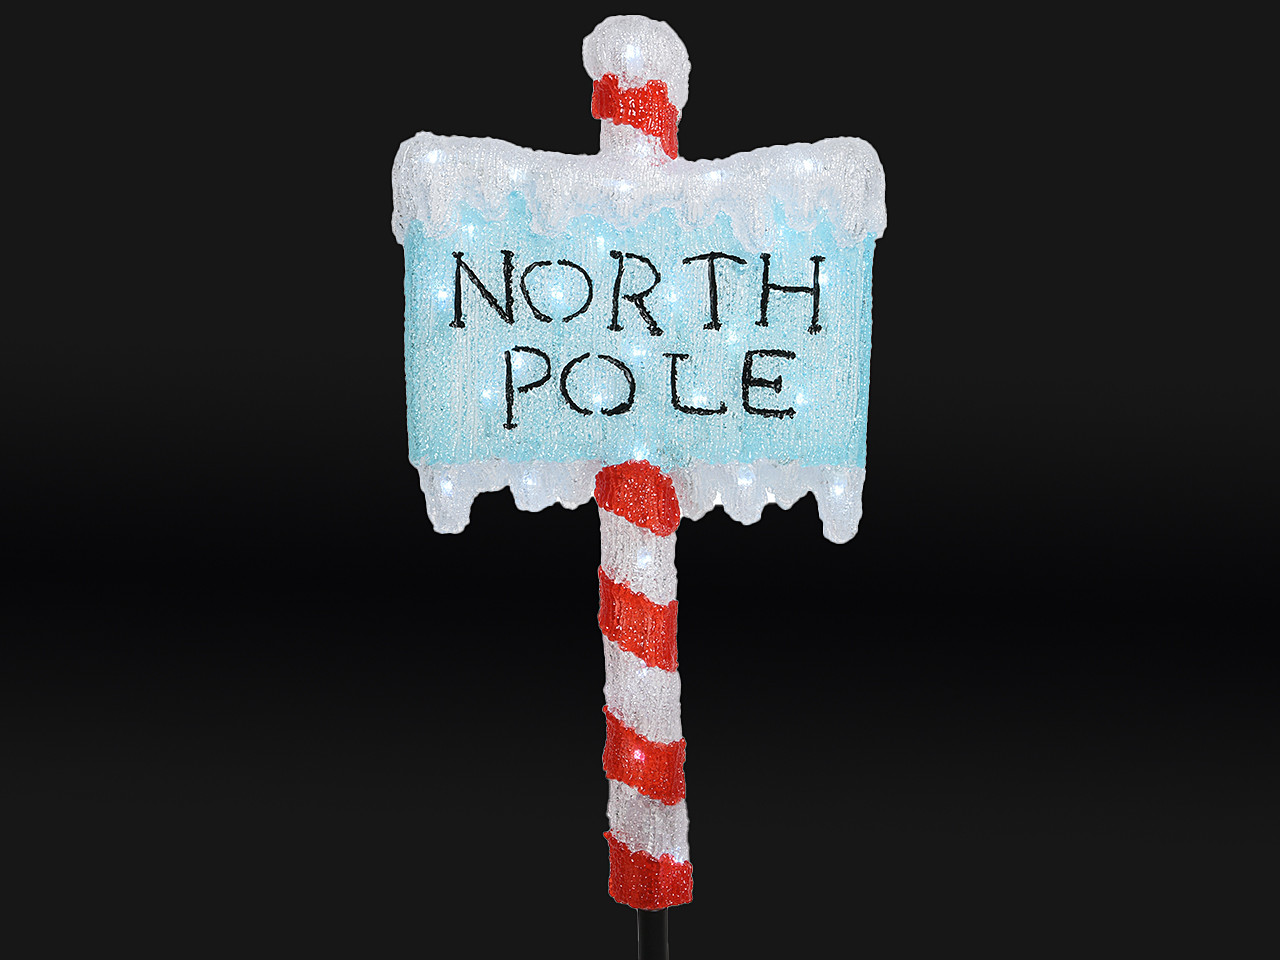 37 in. North Pole Sign Acrylic Christmas Decor Piece LED Cool White, 30 Lights